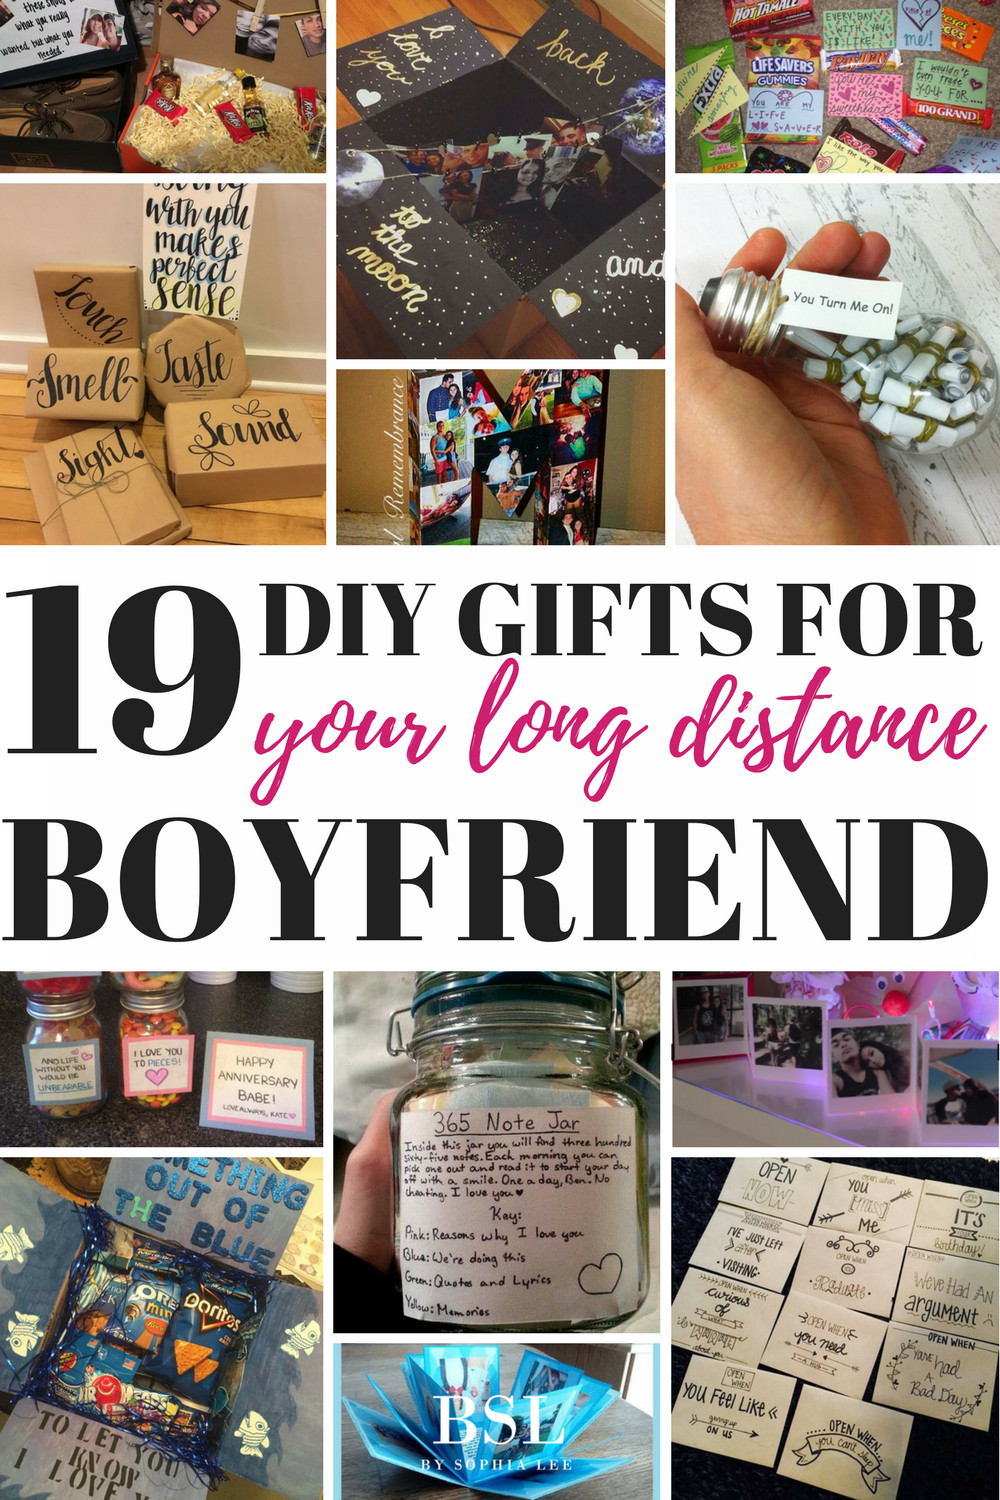 Cute Gift Ideas For Boyfriend Just Because
 19 DIY Gifts For Long Distance Boyfriend That Show You